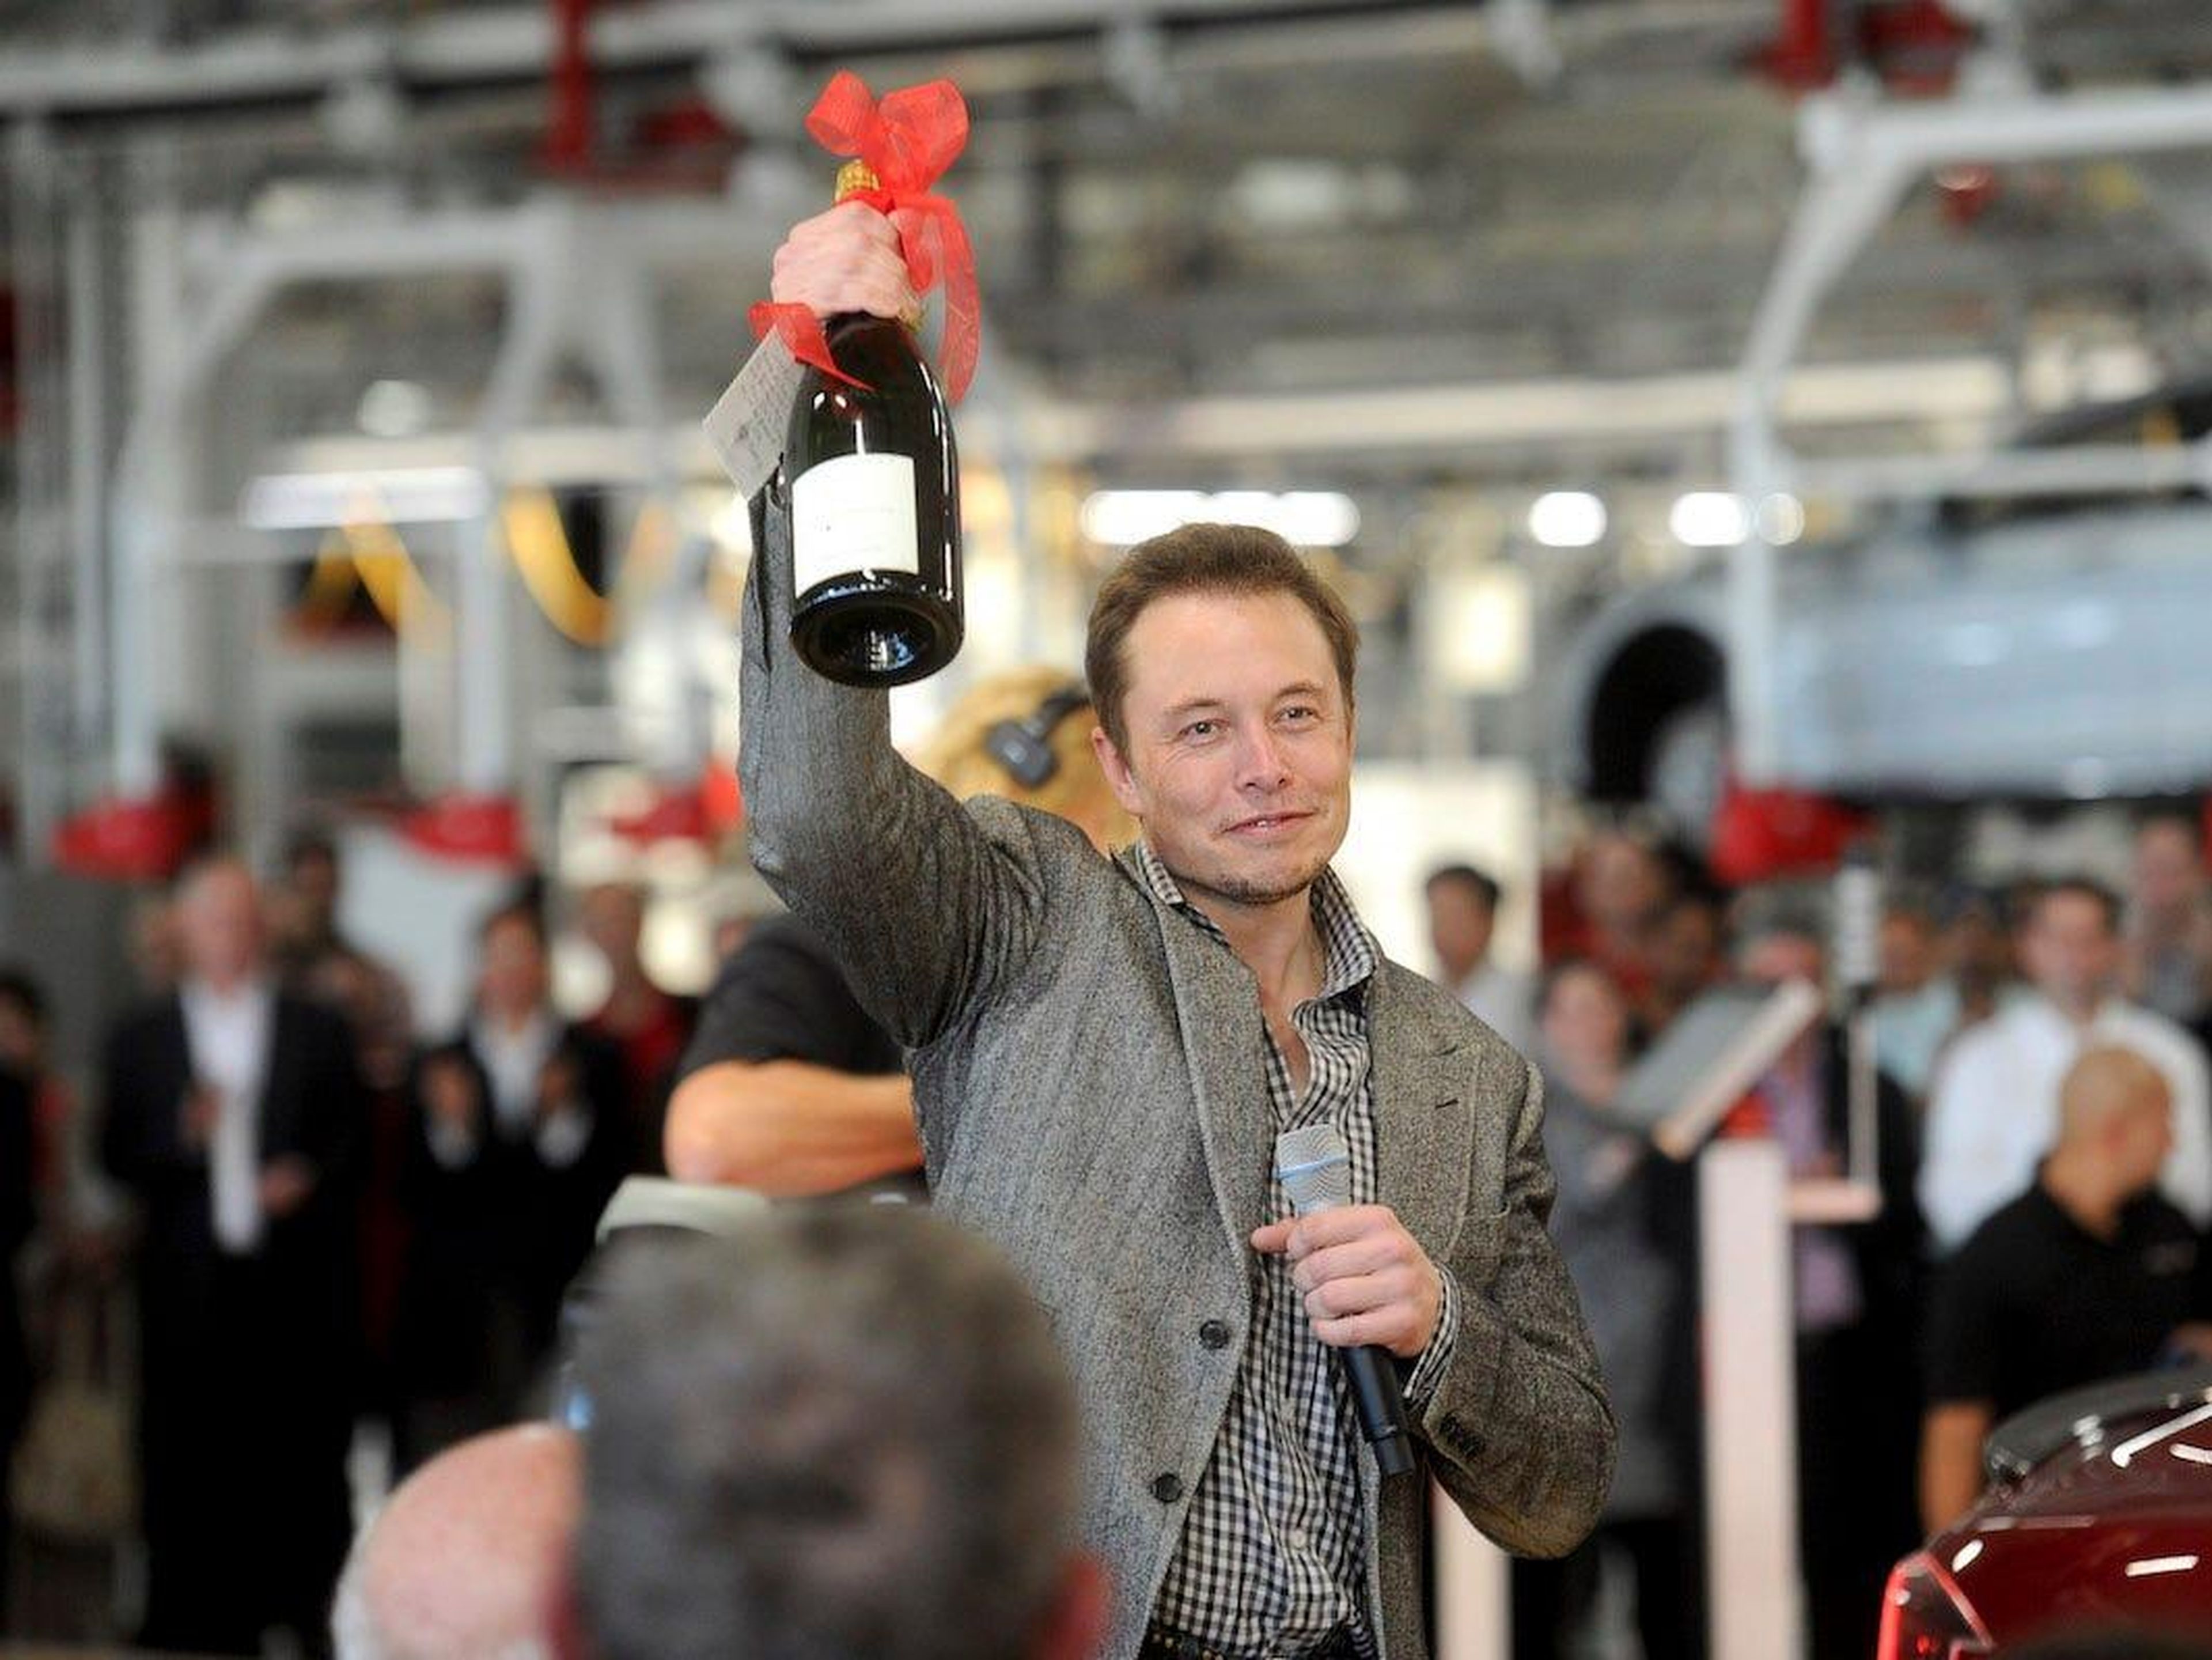 Musk may be a bookworm, but that doesn't mean he can't party. The entrepreneur's legendary bashes have included a birthday party at an English castle that turned into a big game of hide-and-seek, and inviting a knife-thrower to